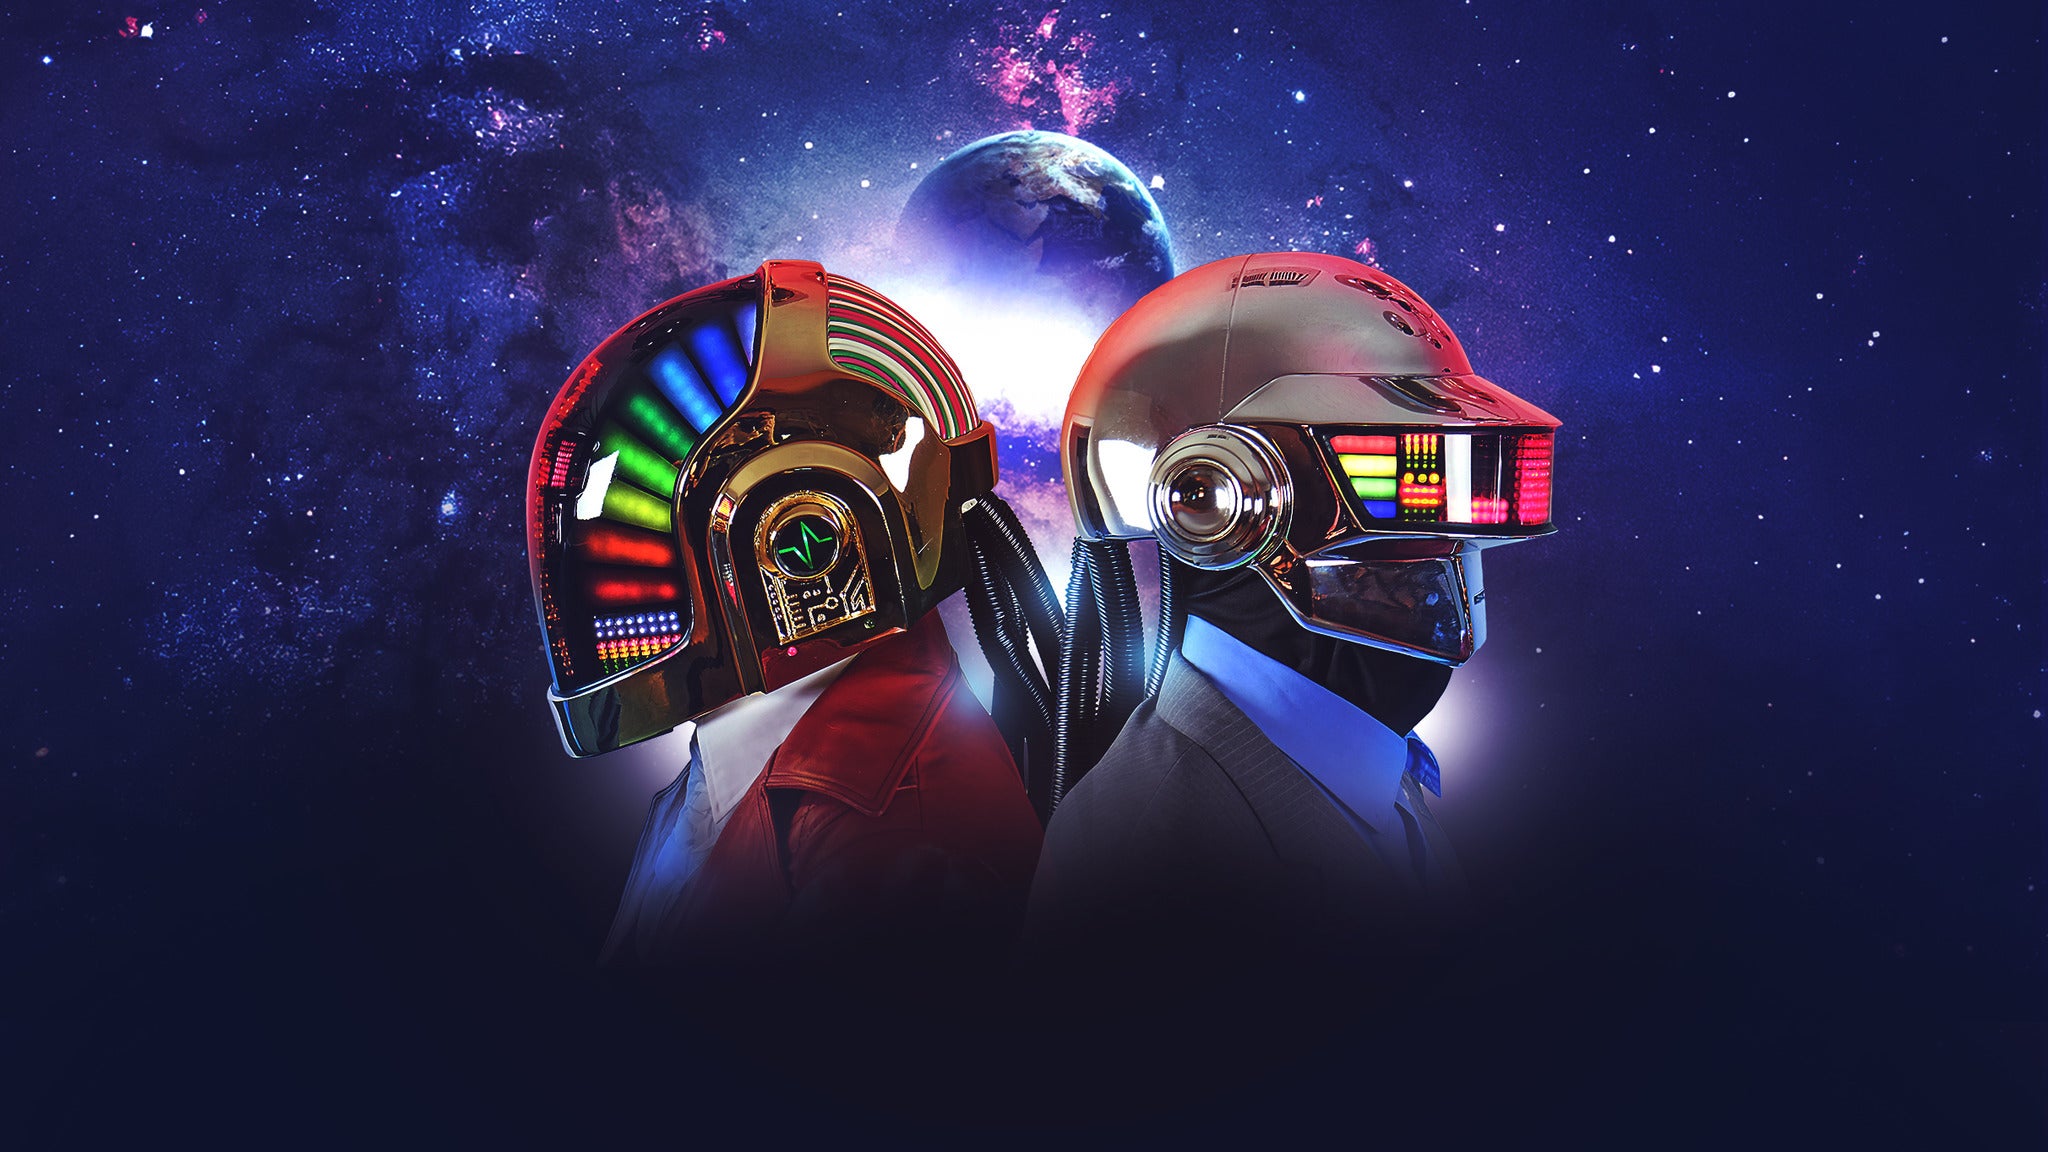 Image used with permission from Ticketmaster | One More Time - A Tribute to Daft Punk tickets